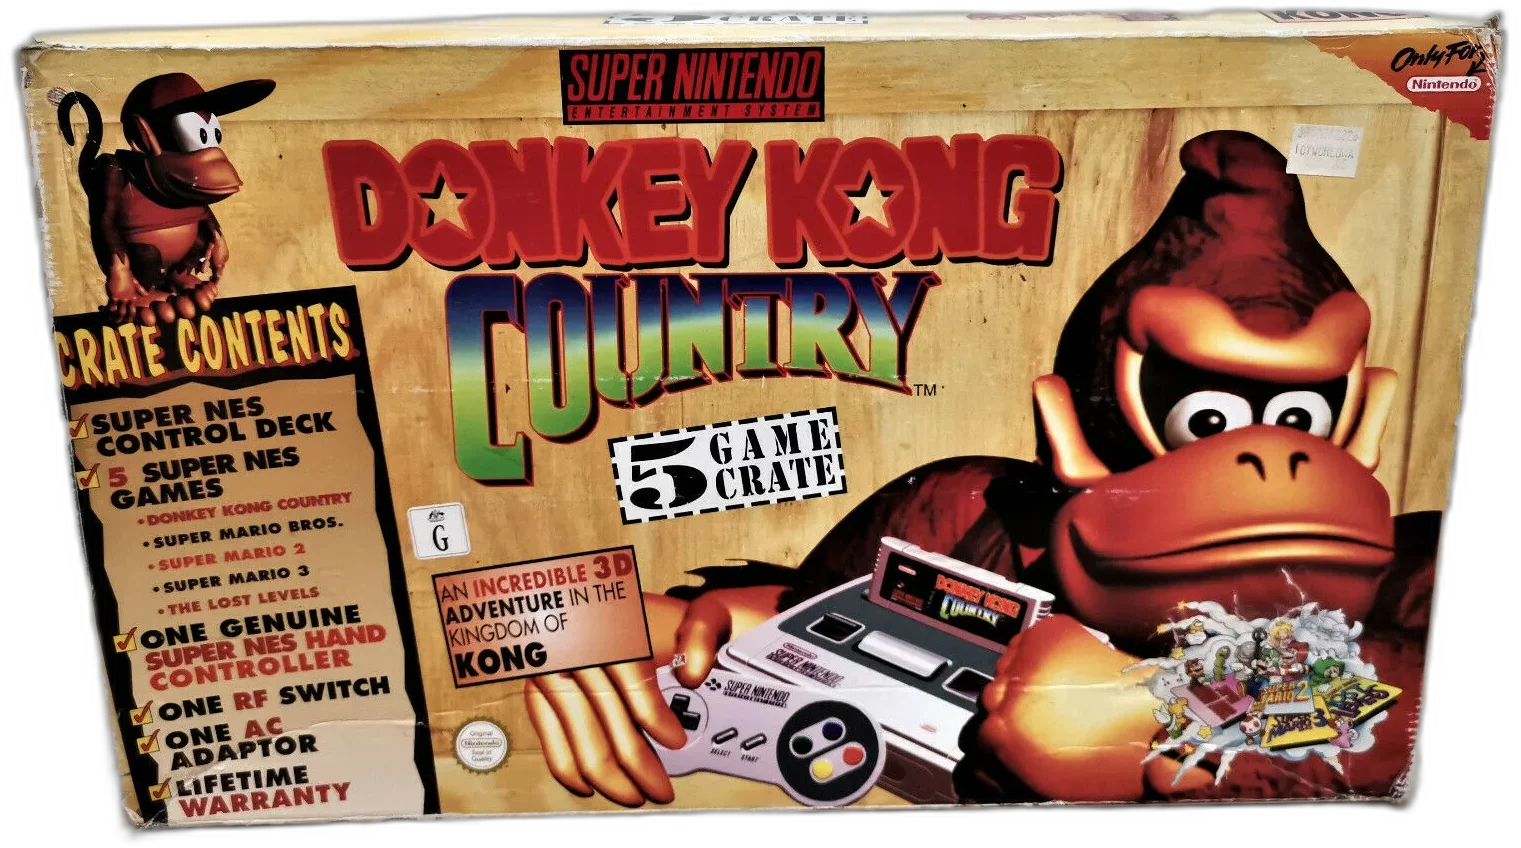  SNES Donkey Kong Country 5 Game Bundle